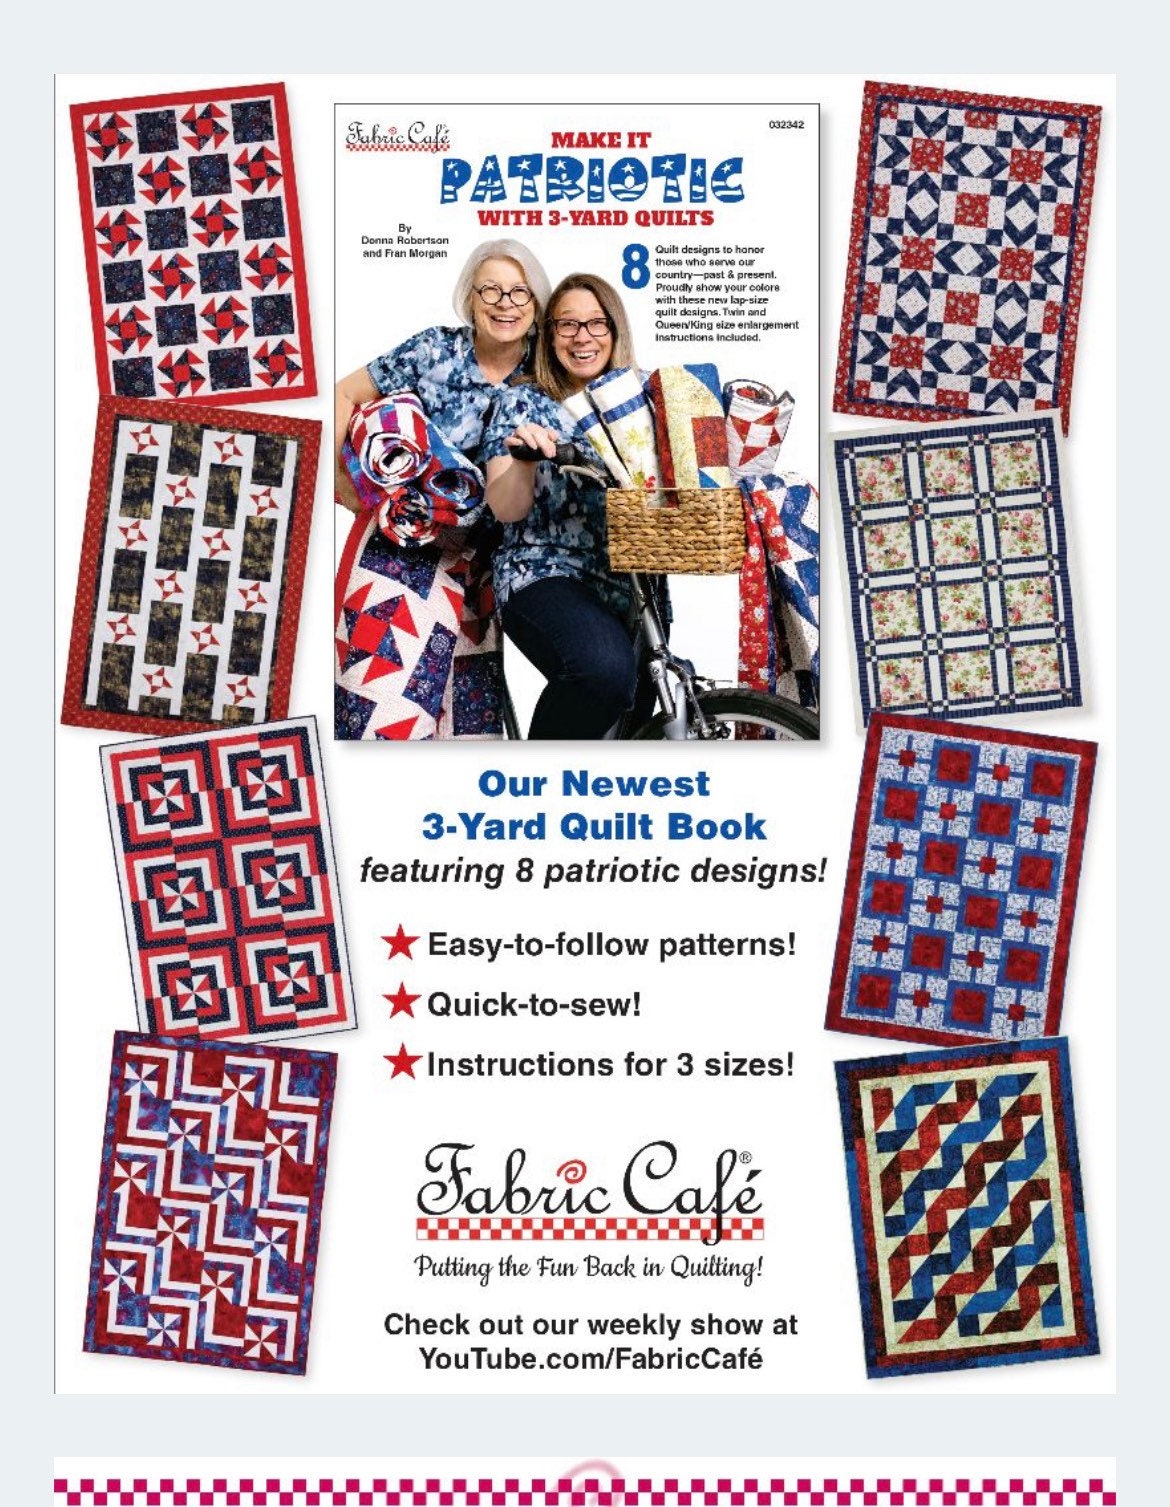 Make It Patriotic, With 3-yard Quilts, 8 New Patterns by Fabric Cafe 